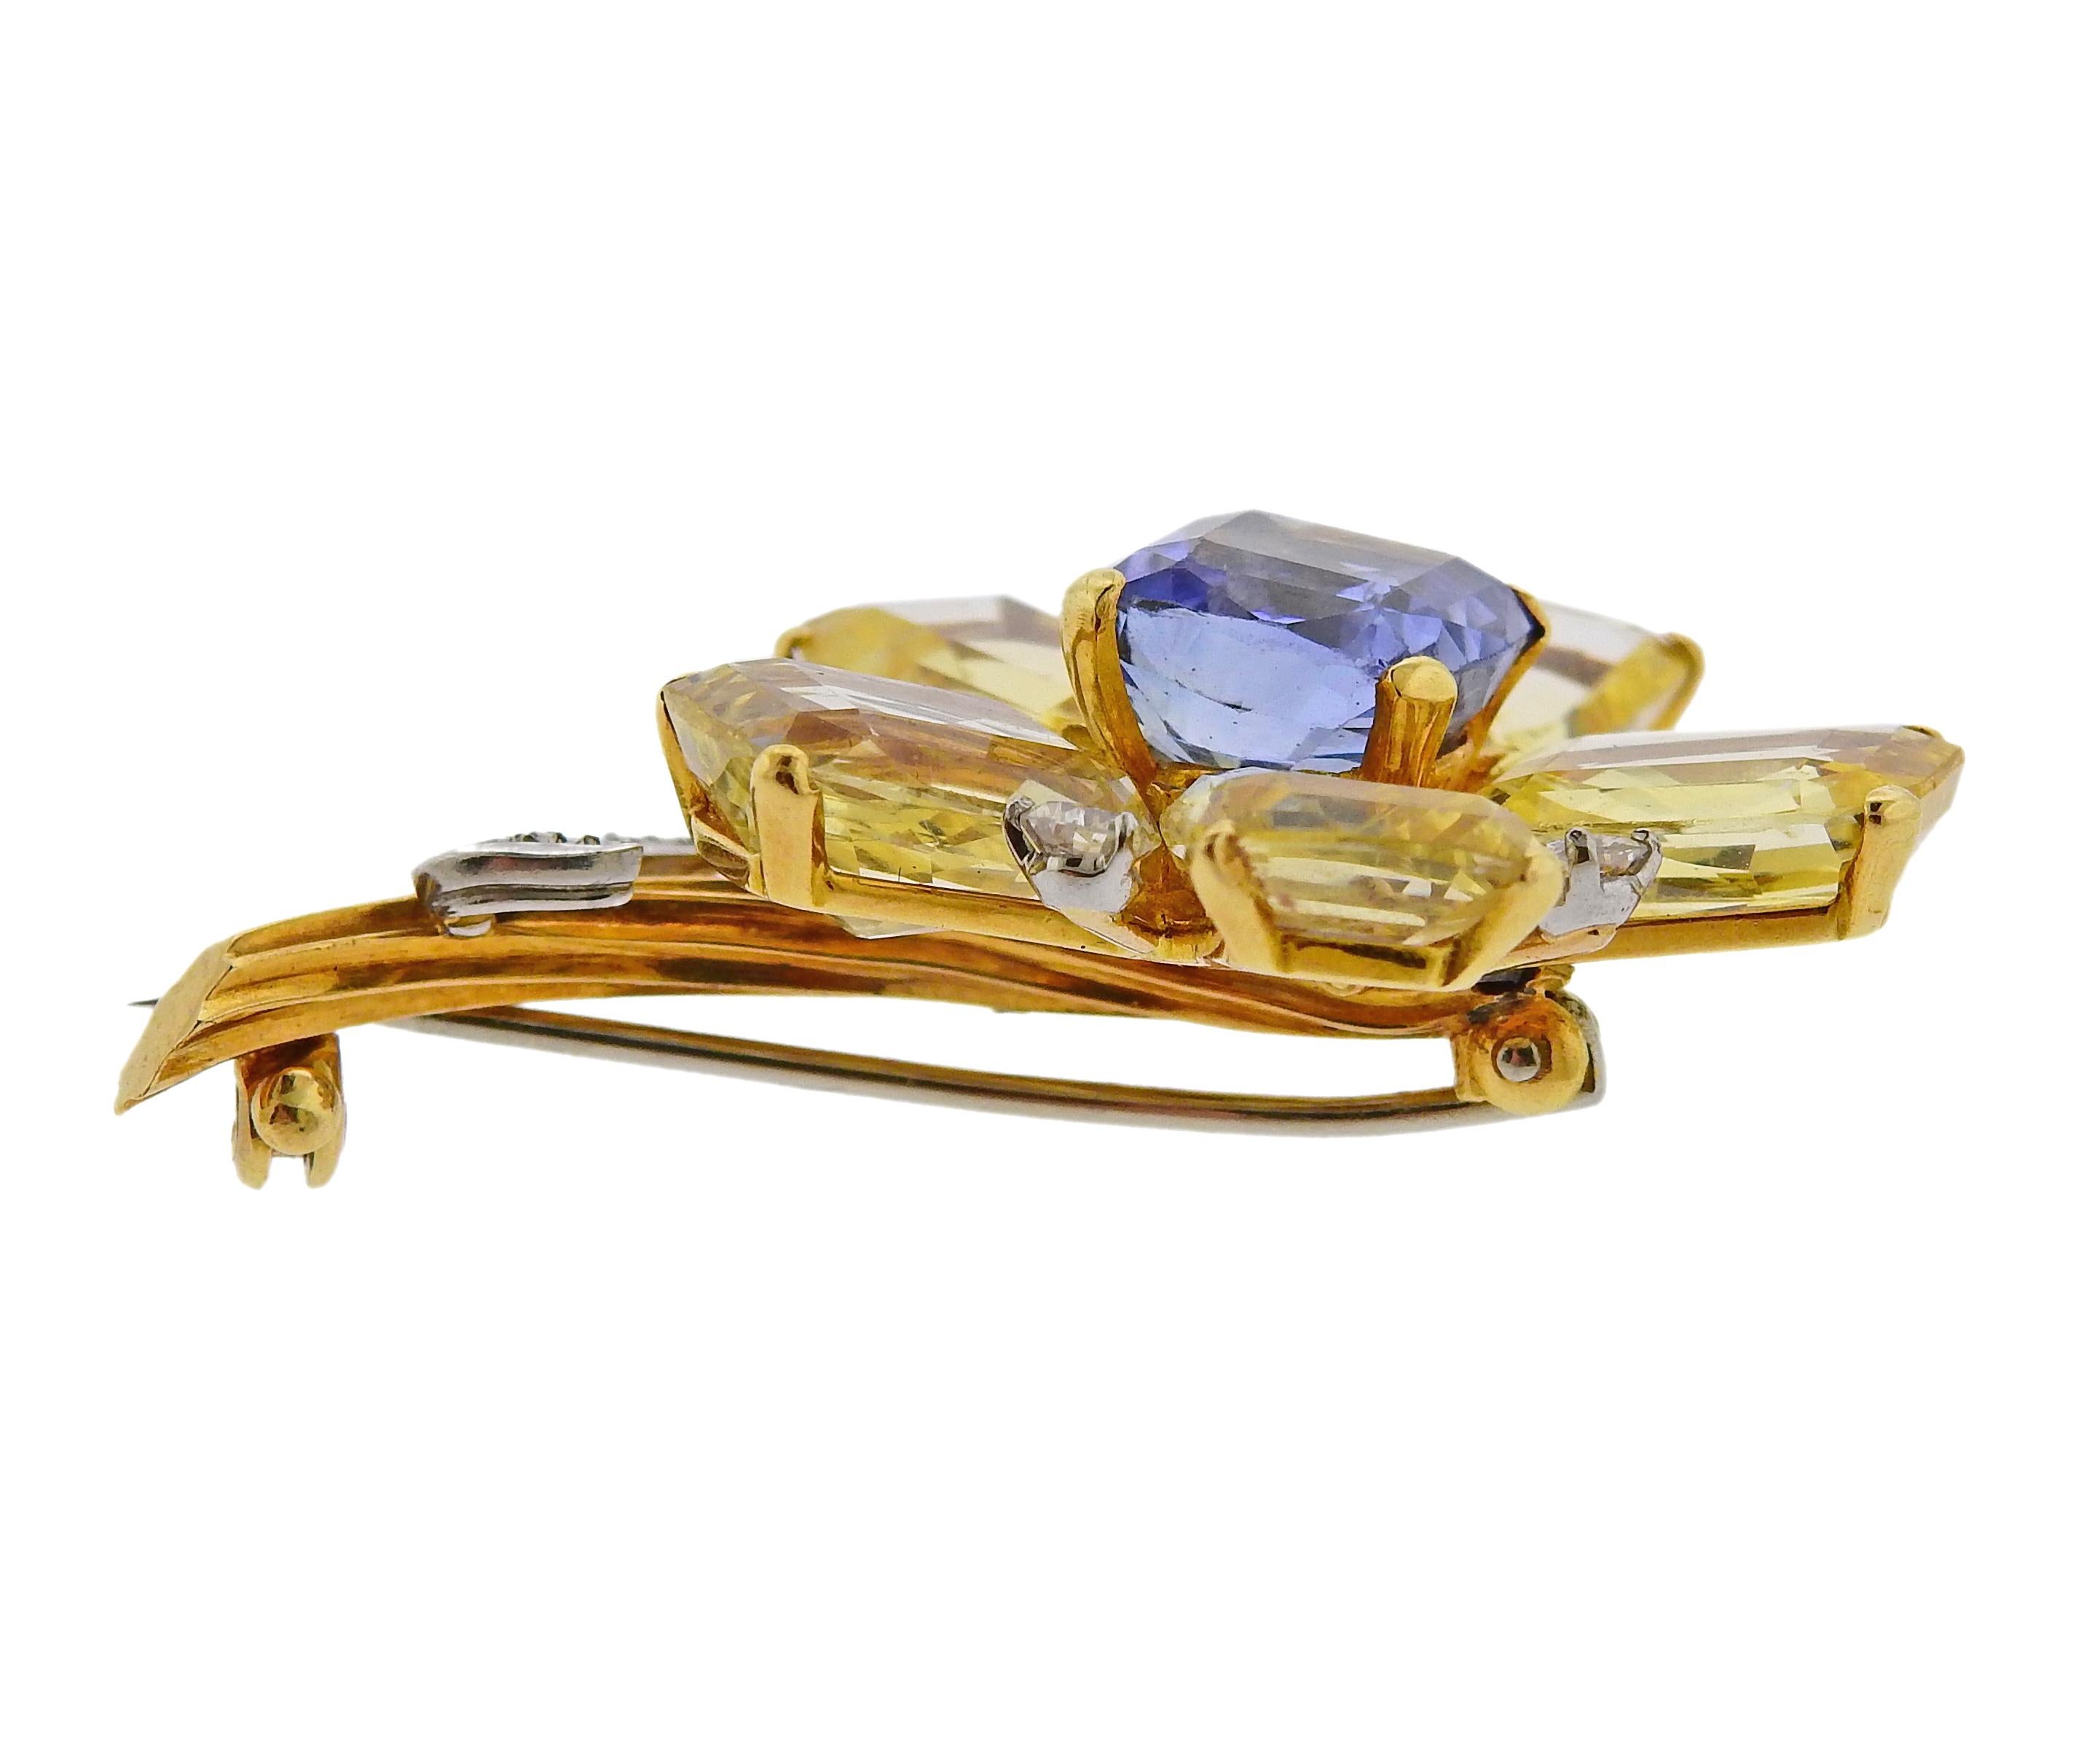 18k gold flower brooch by Cartier, set with approx. 0.85ctw in diamonds, center blue sapphire - approx. 5.50ct, and four yellow sapphire petals, each approx. 6 - 6.50cts.  The brooch is 46mm x 32mm. Marked Cartier. Weighs 17.7 grams.

SKU#PB-03022